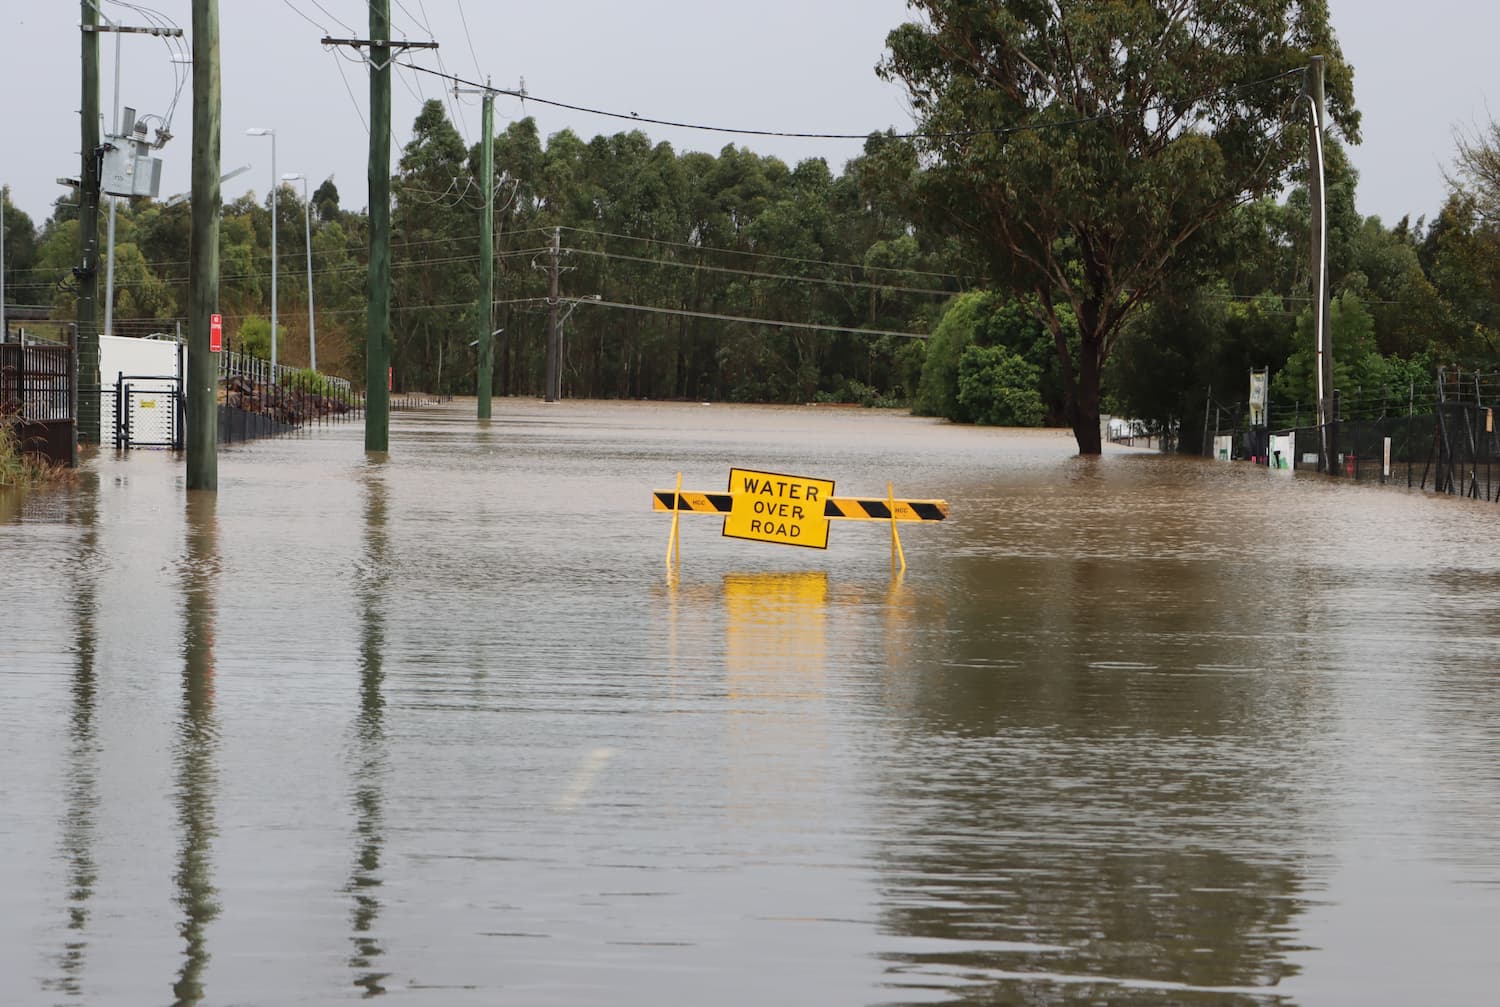 Flooding and severe storms: Tips to minimise losses